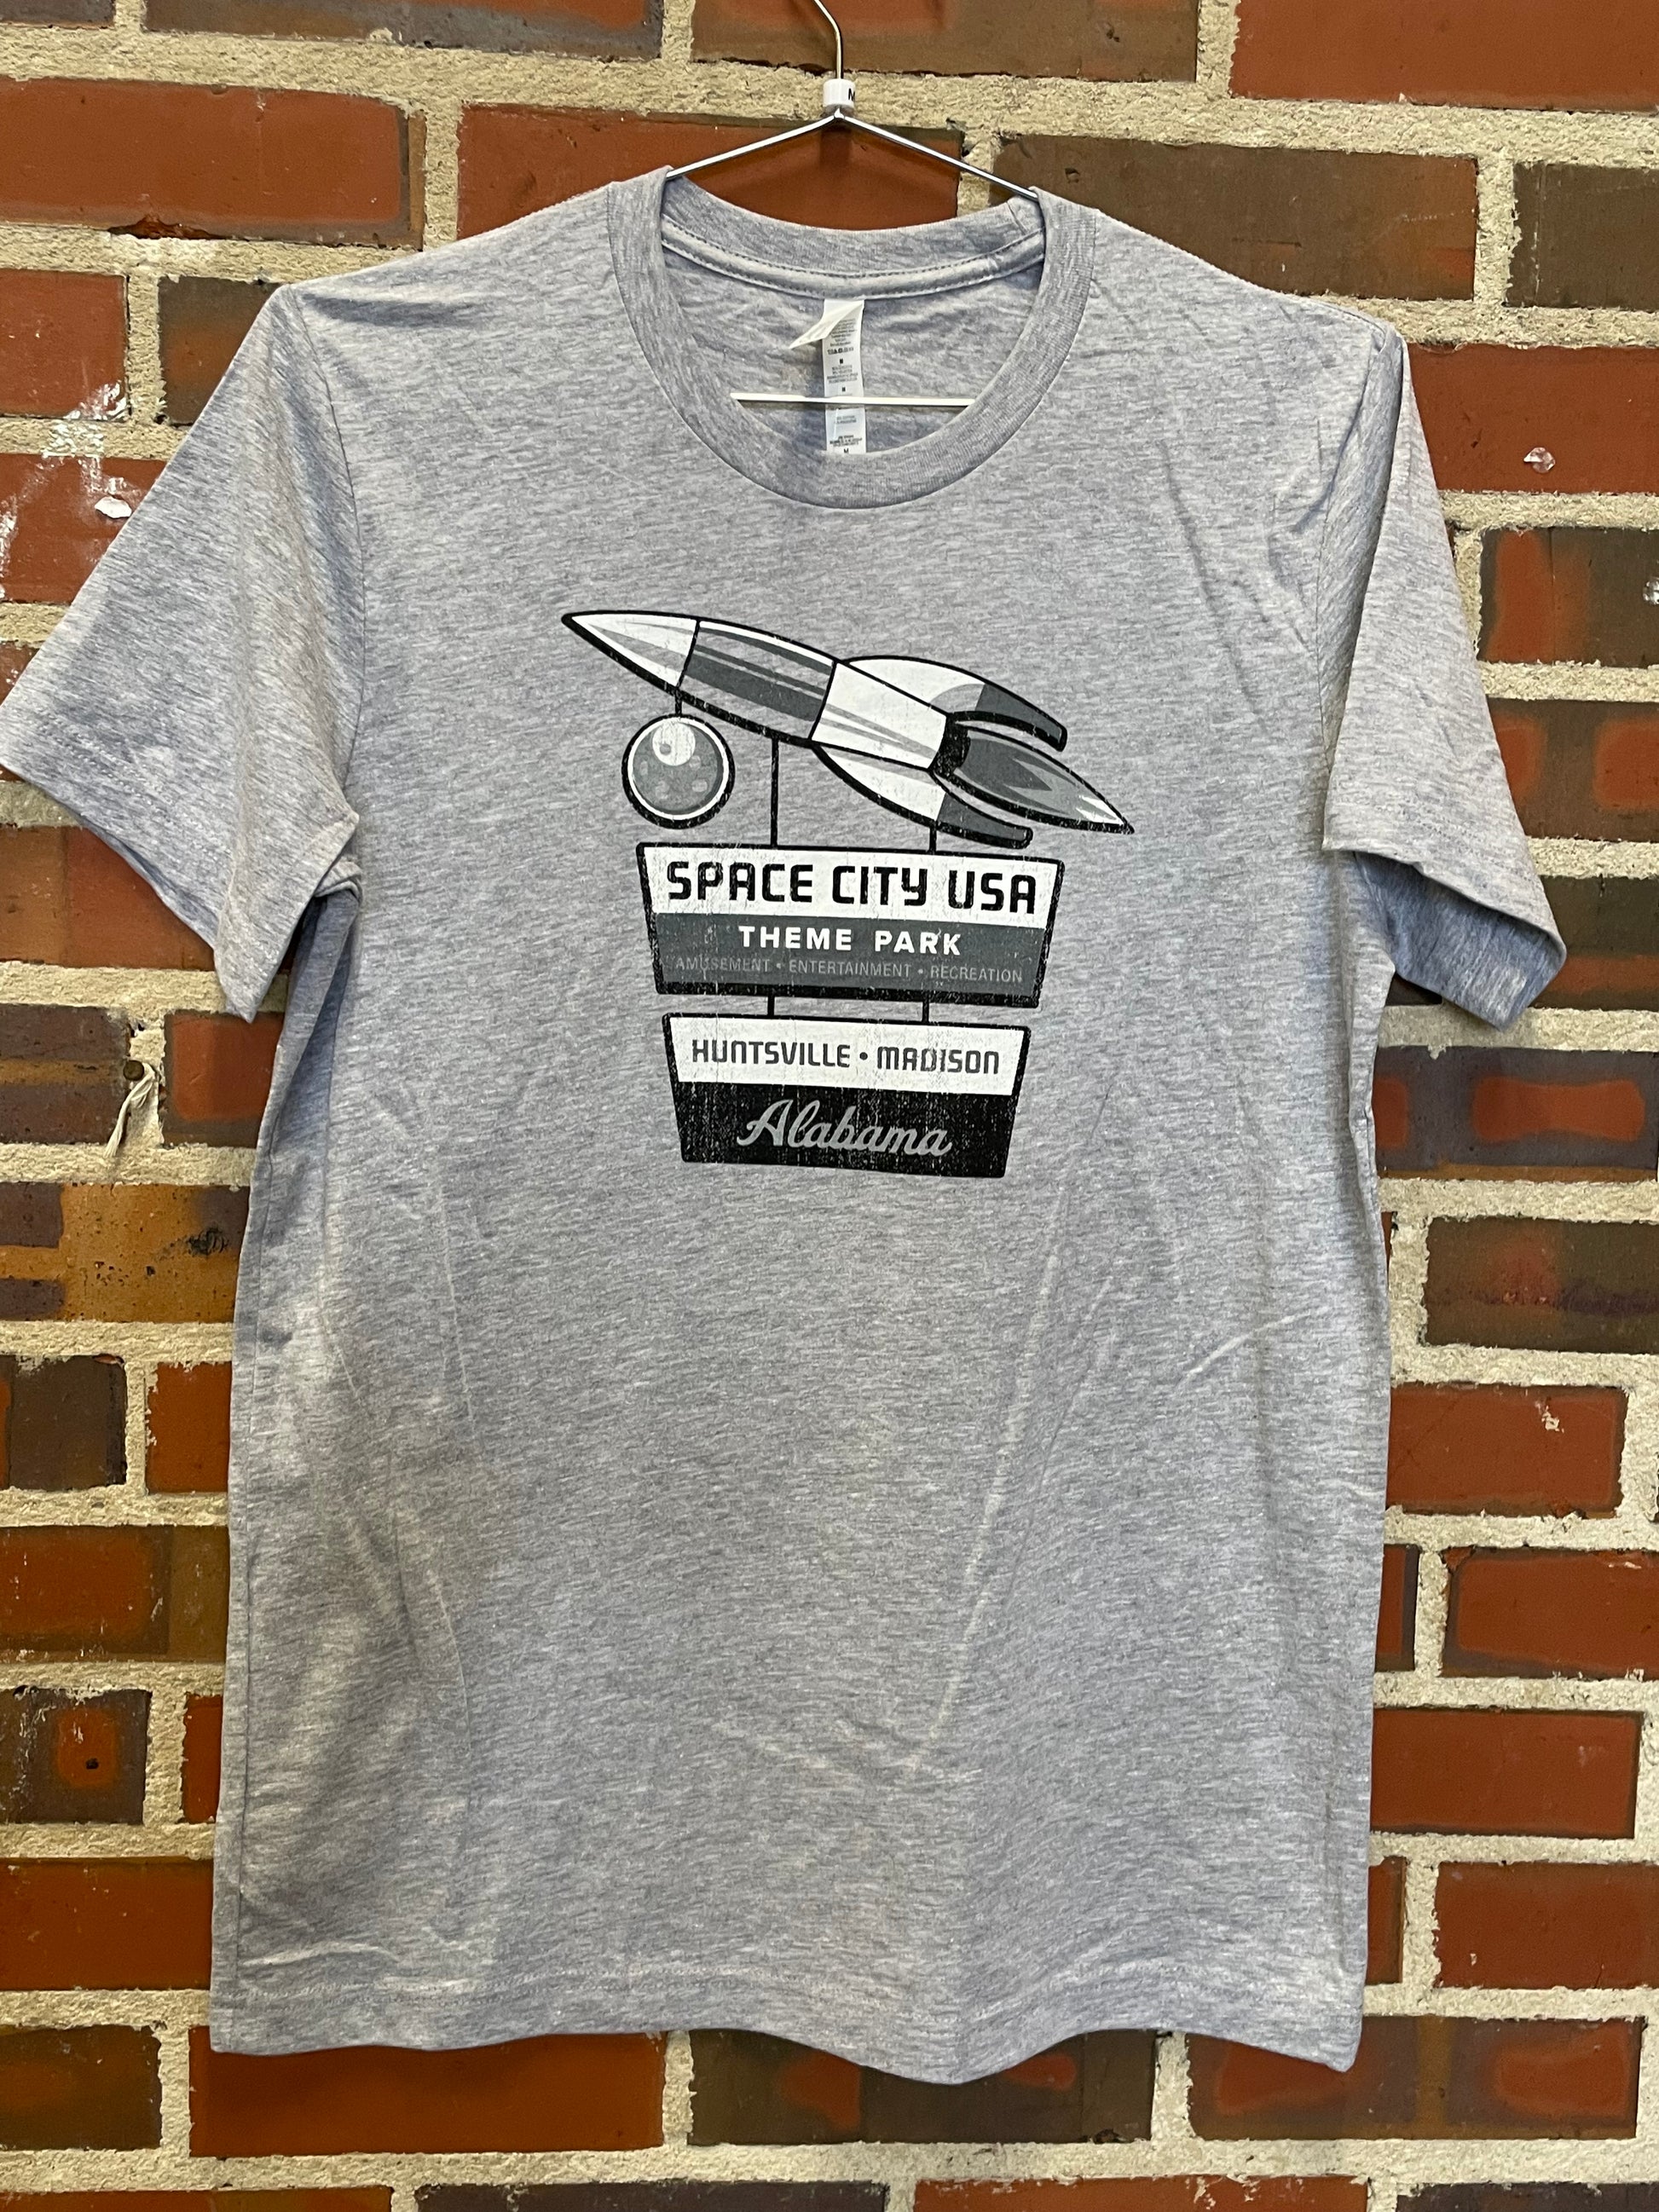 Image of fun retro Space City USA theme park design on light heather grey t-shirt hanging against brick wall at Lowe Mill